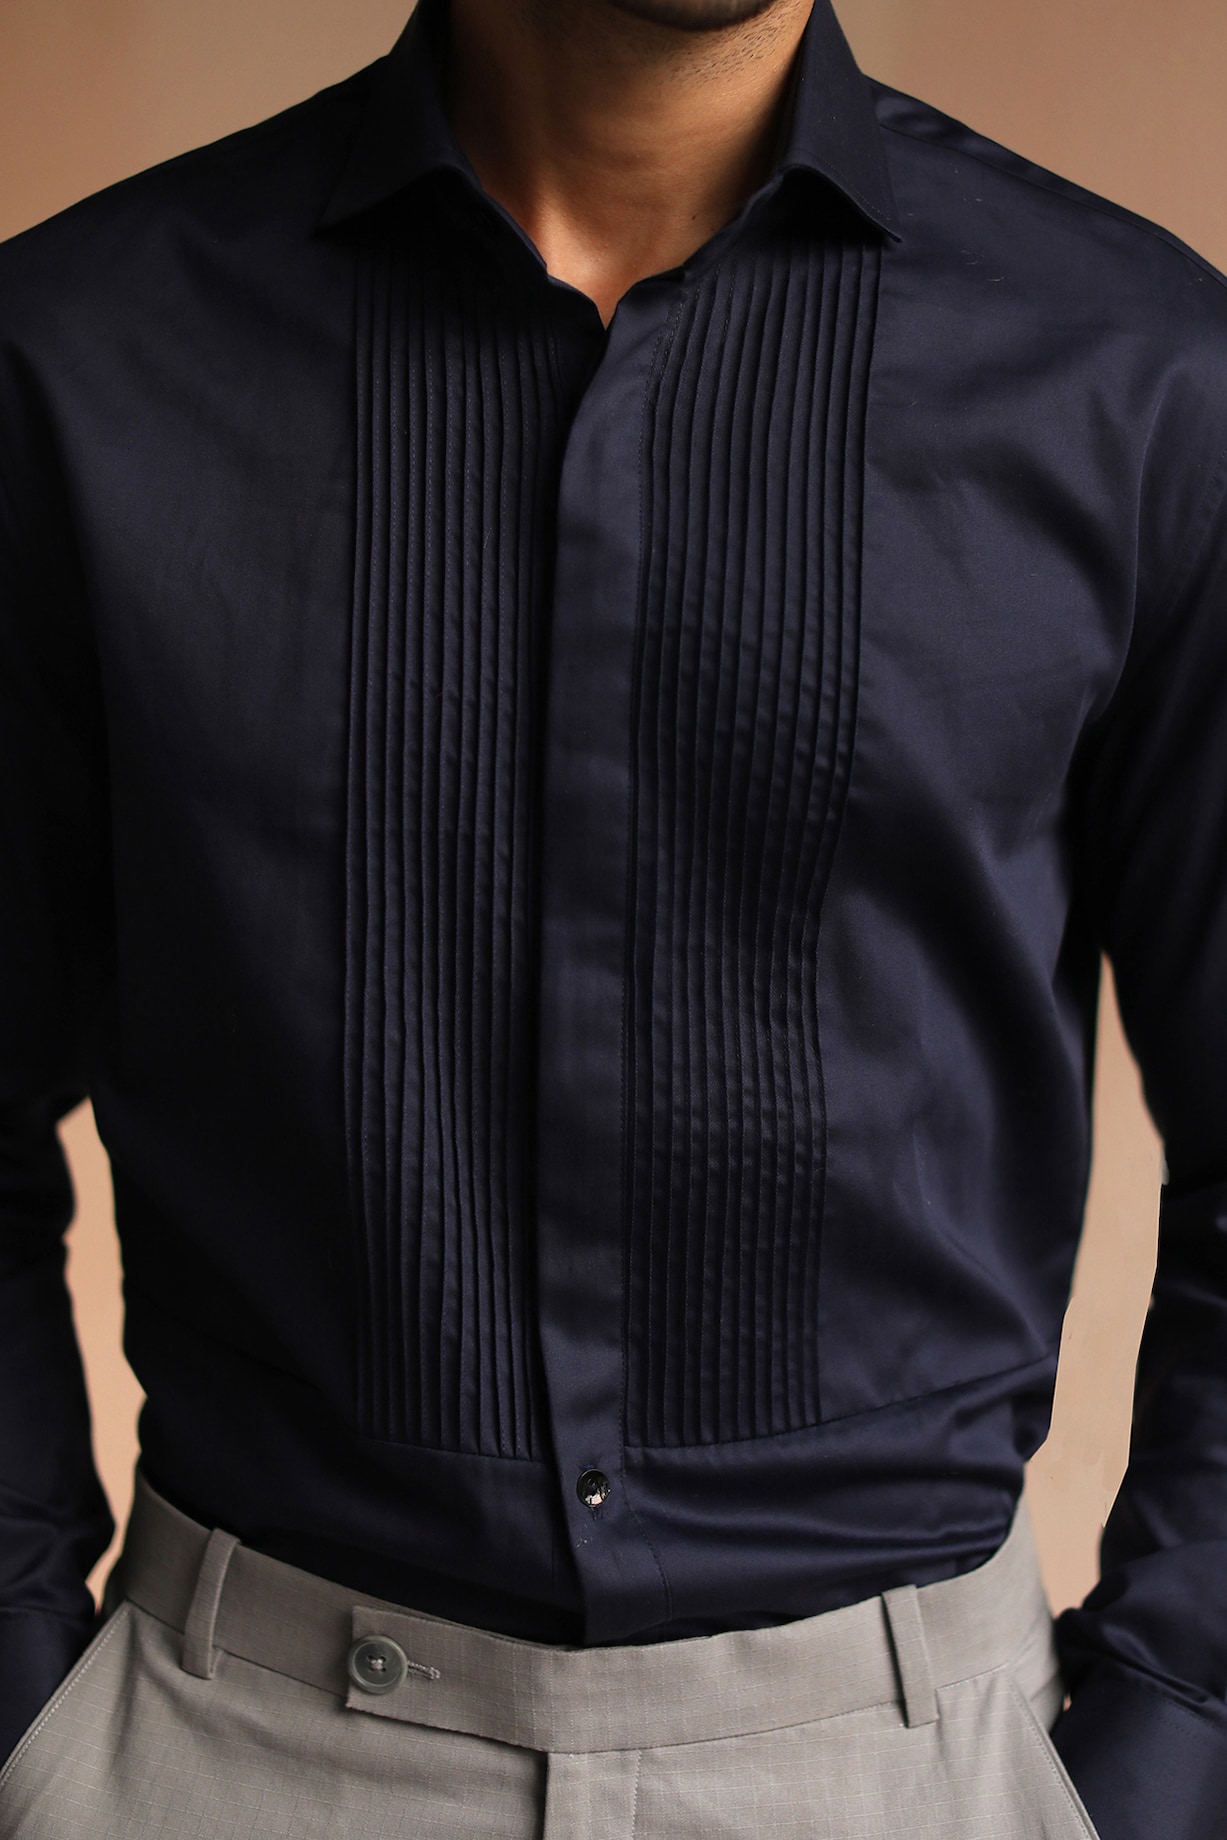 Navy Blue Cotton Shirt by Philocaly